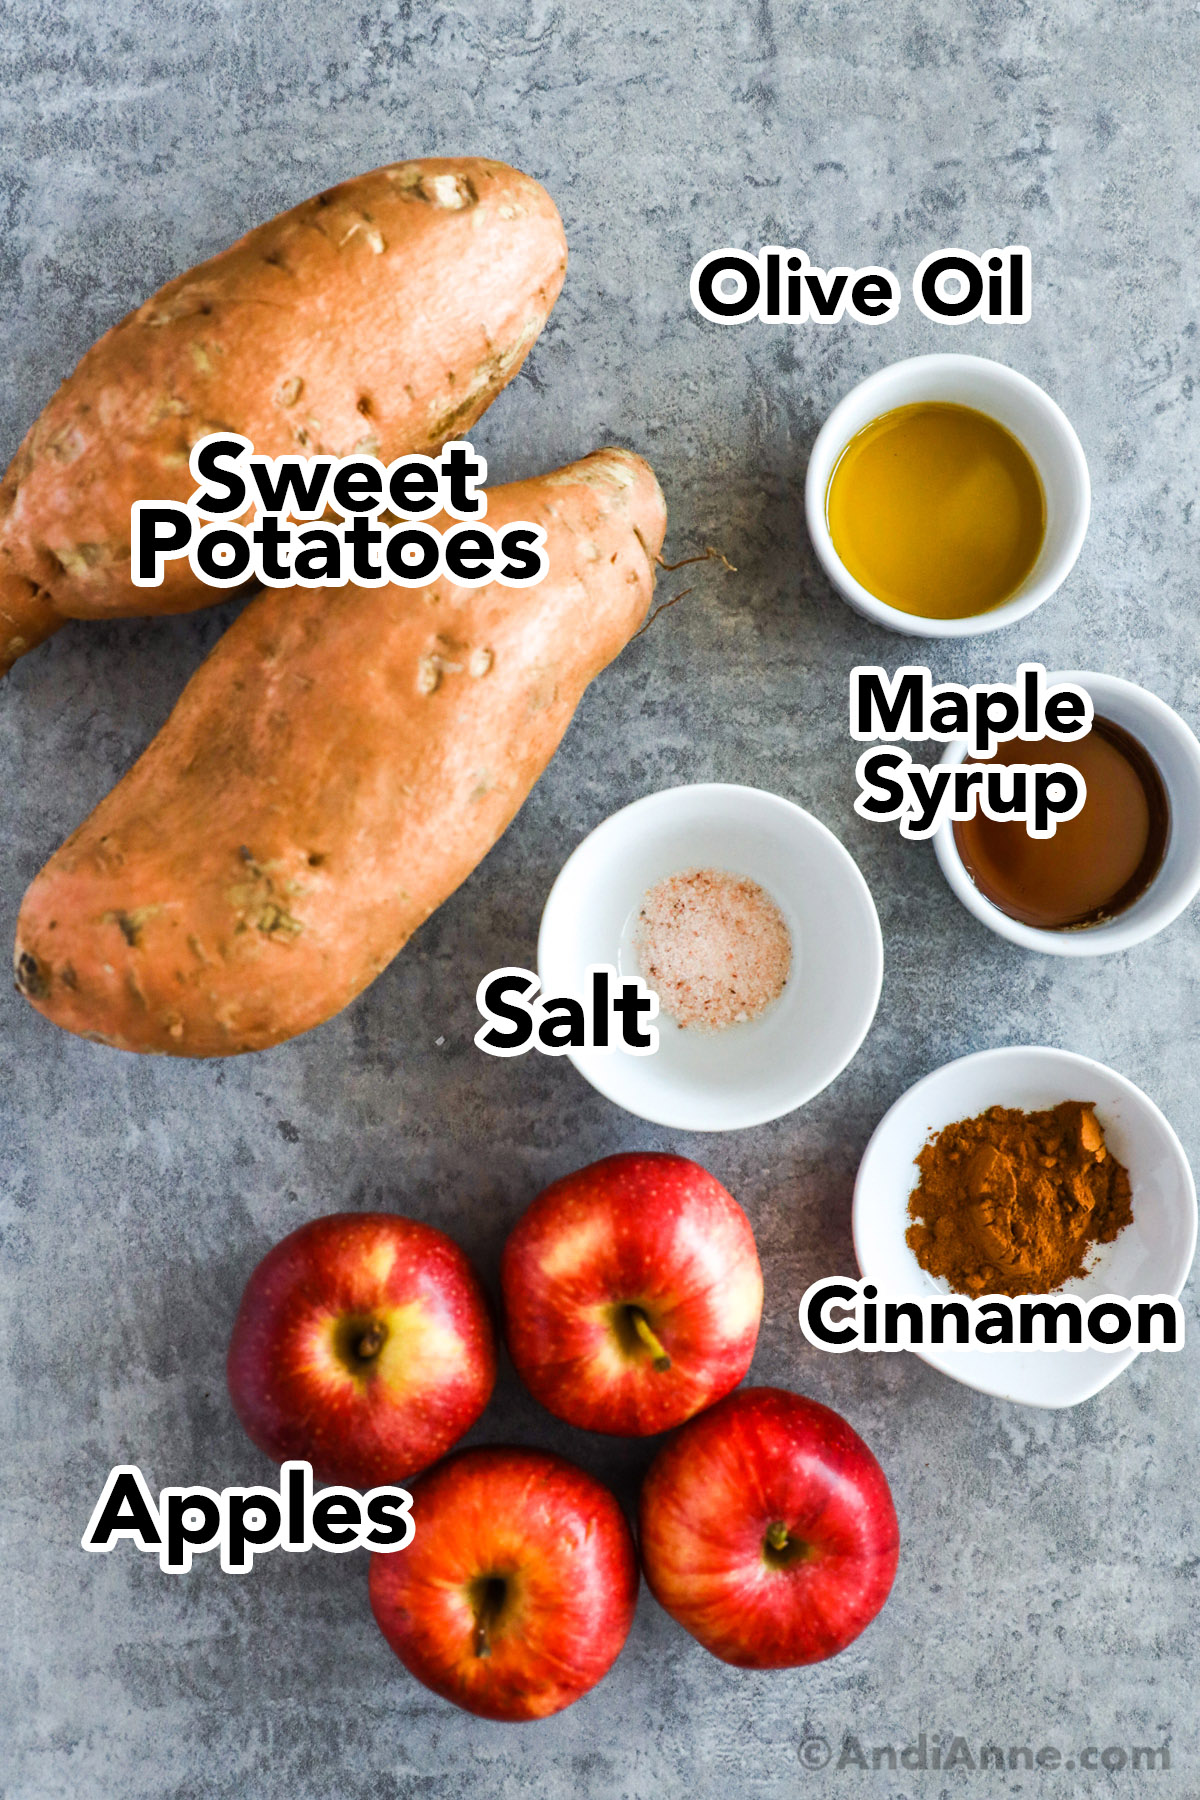 Recipe ingredients including sweet potatoes, apples, bowls of cinnamon, salt, maple syrup, and olive oil.